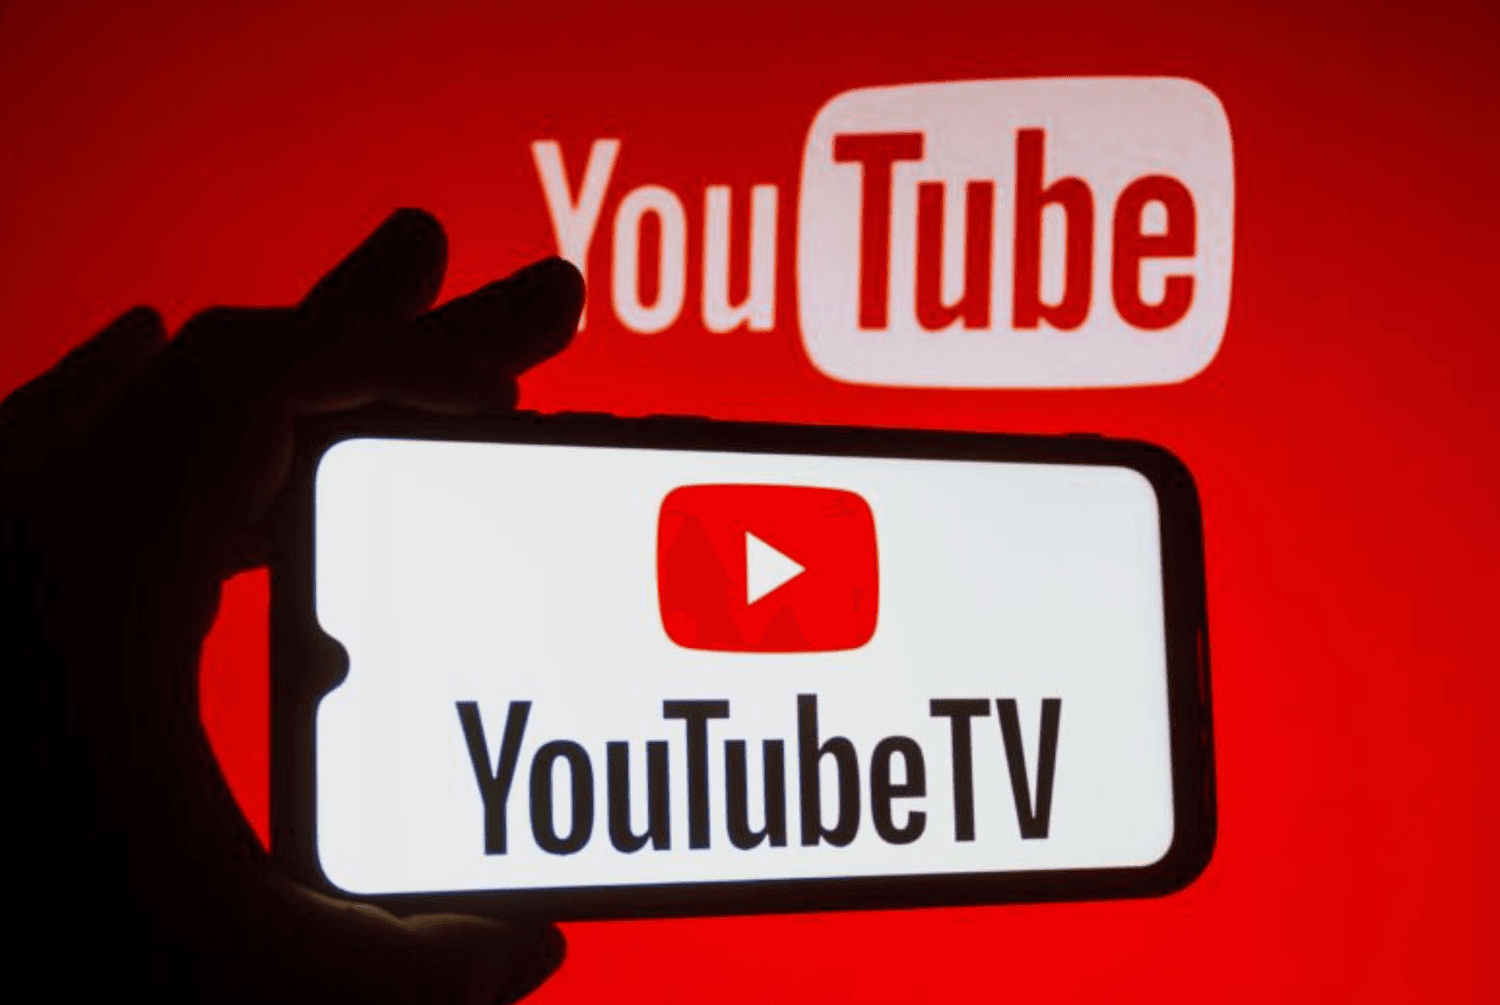 Cancel your YouTube TV Subscription